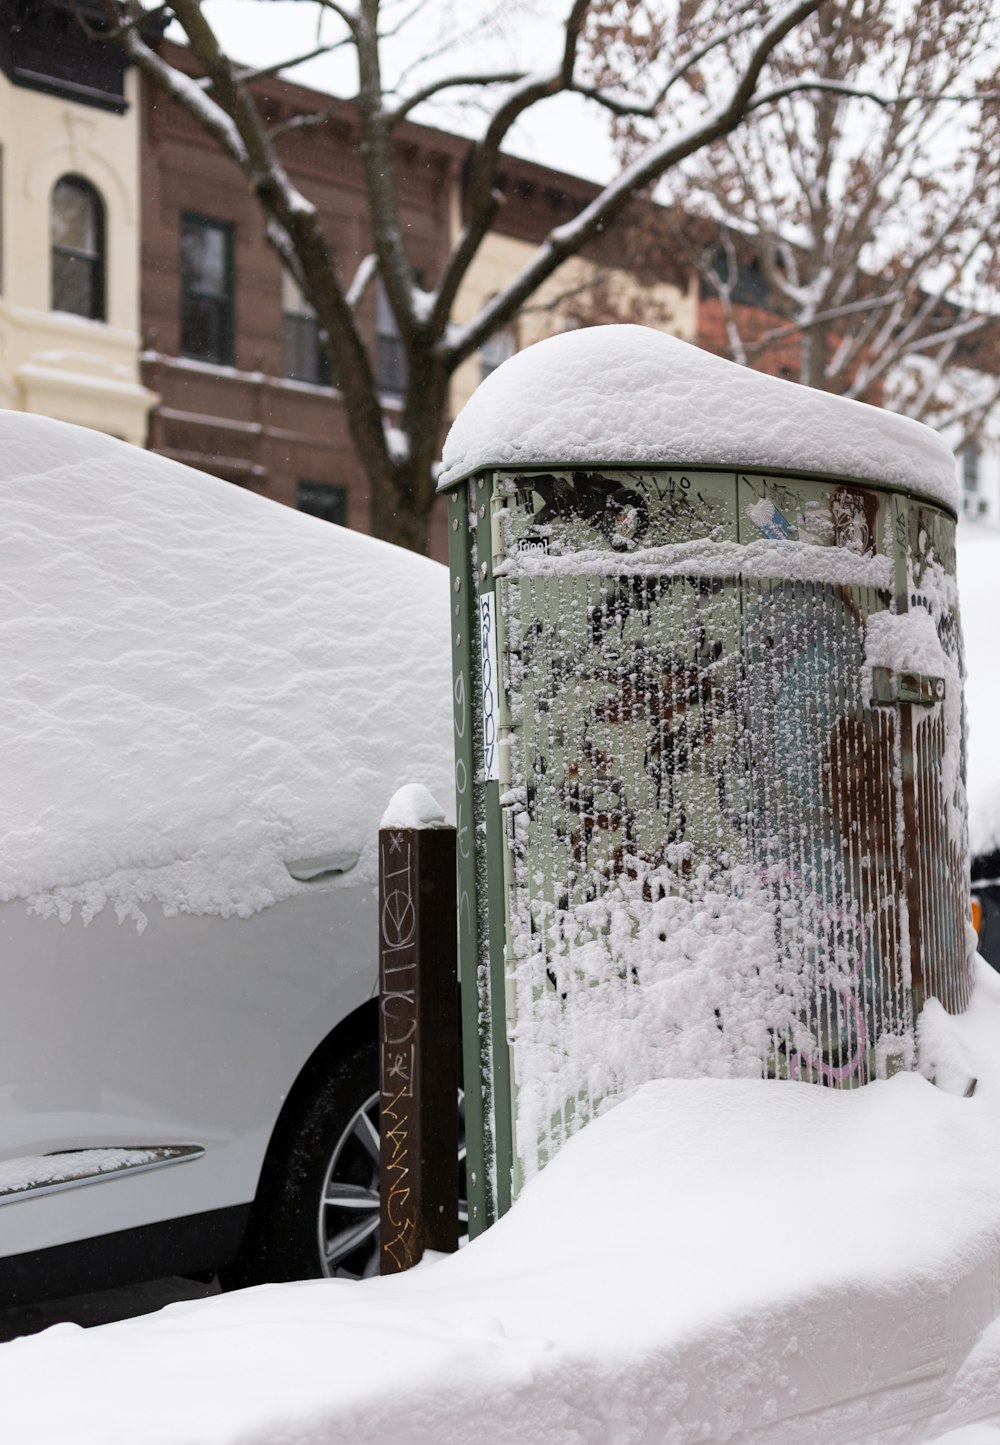 a parking meter covered in snow next to a white car